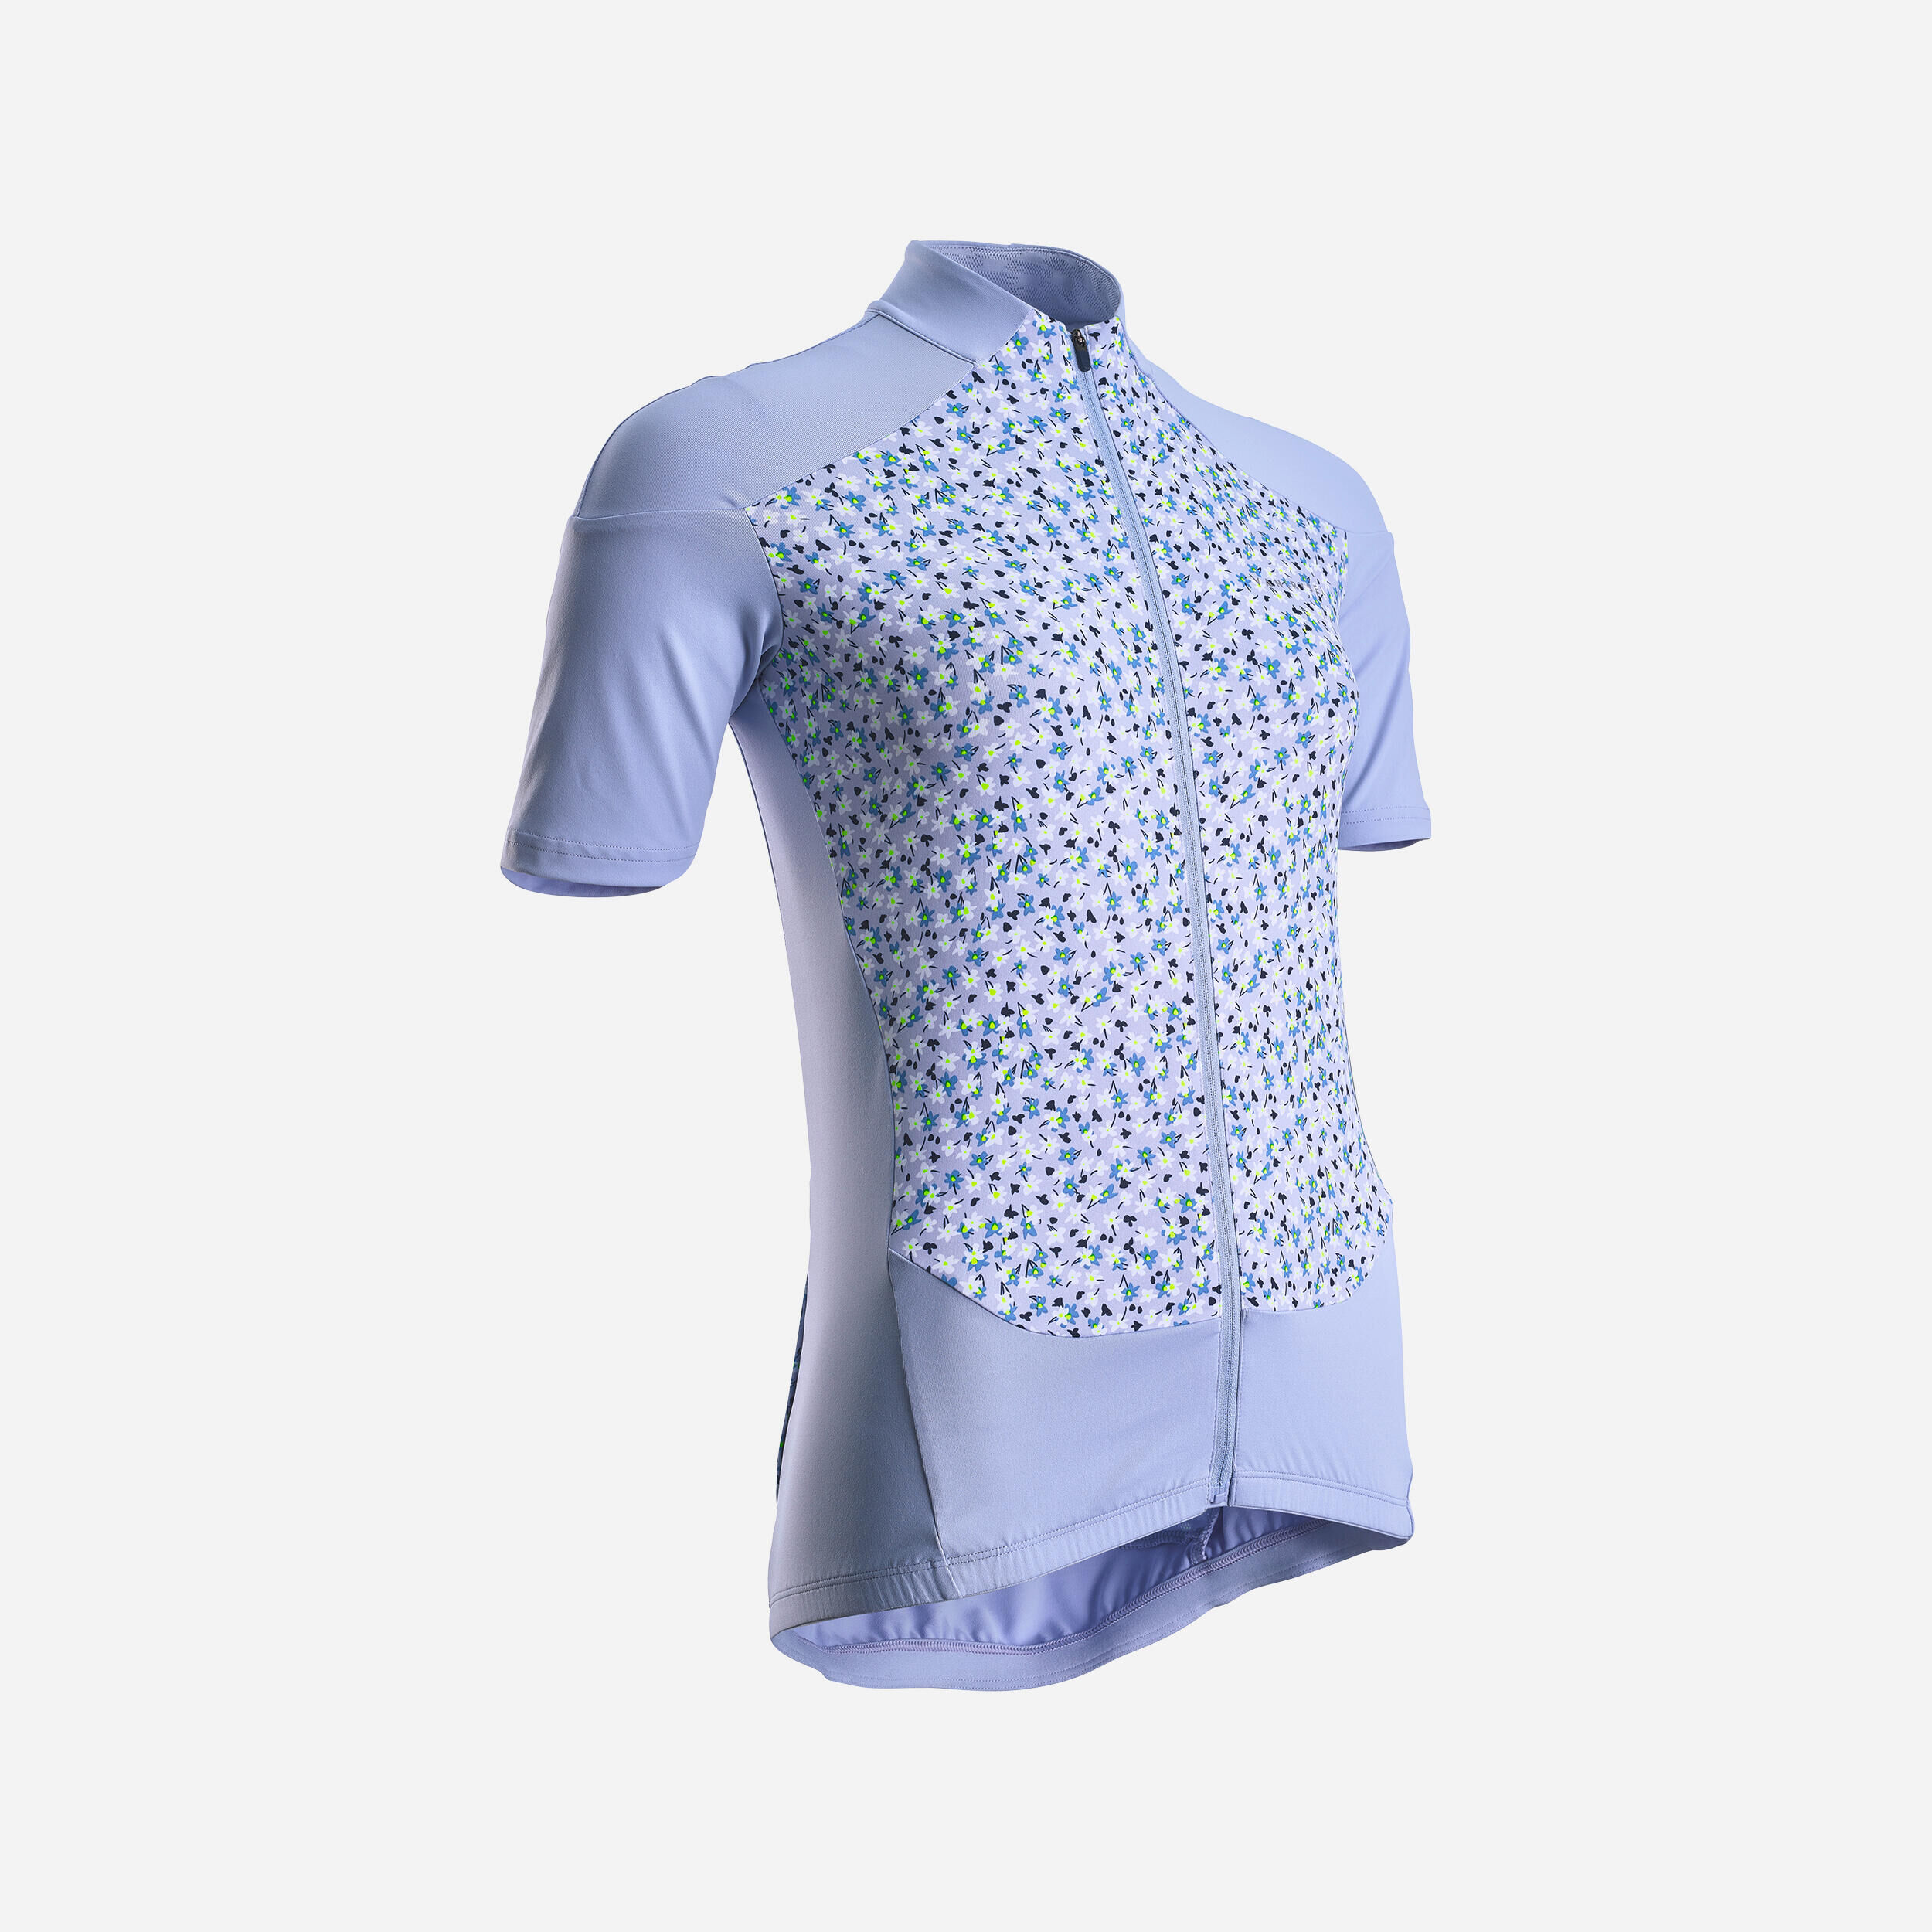 VAN RYSEL Women's Short-Sleeved Road Cycling Jersey RC500 - Floral/Lavender